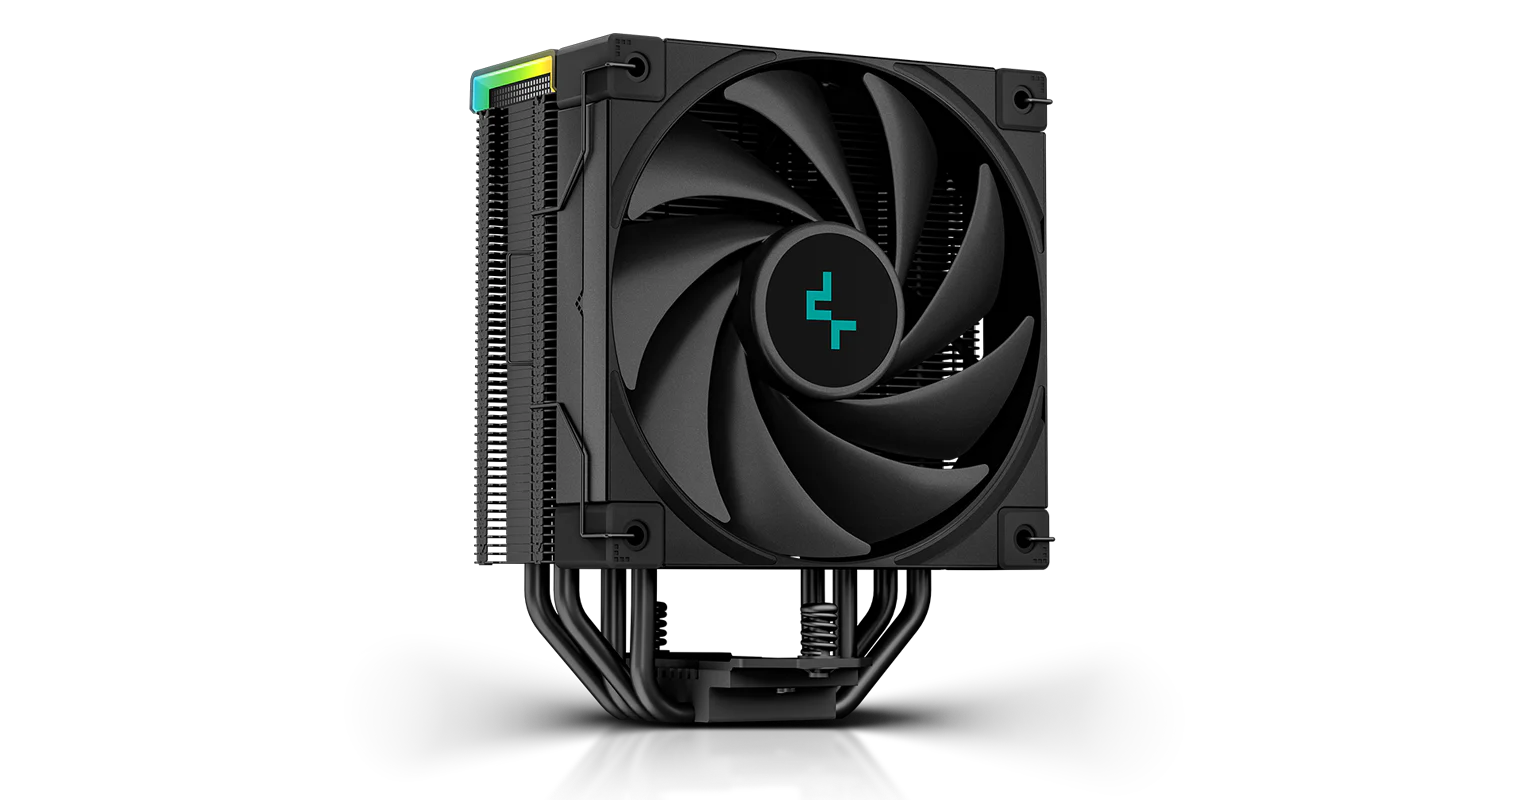 Build a PC for Deepcool AK400 DIGITAL (R-AK400-BKADMN-G) Black with  compatibility check and price analysis